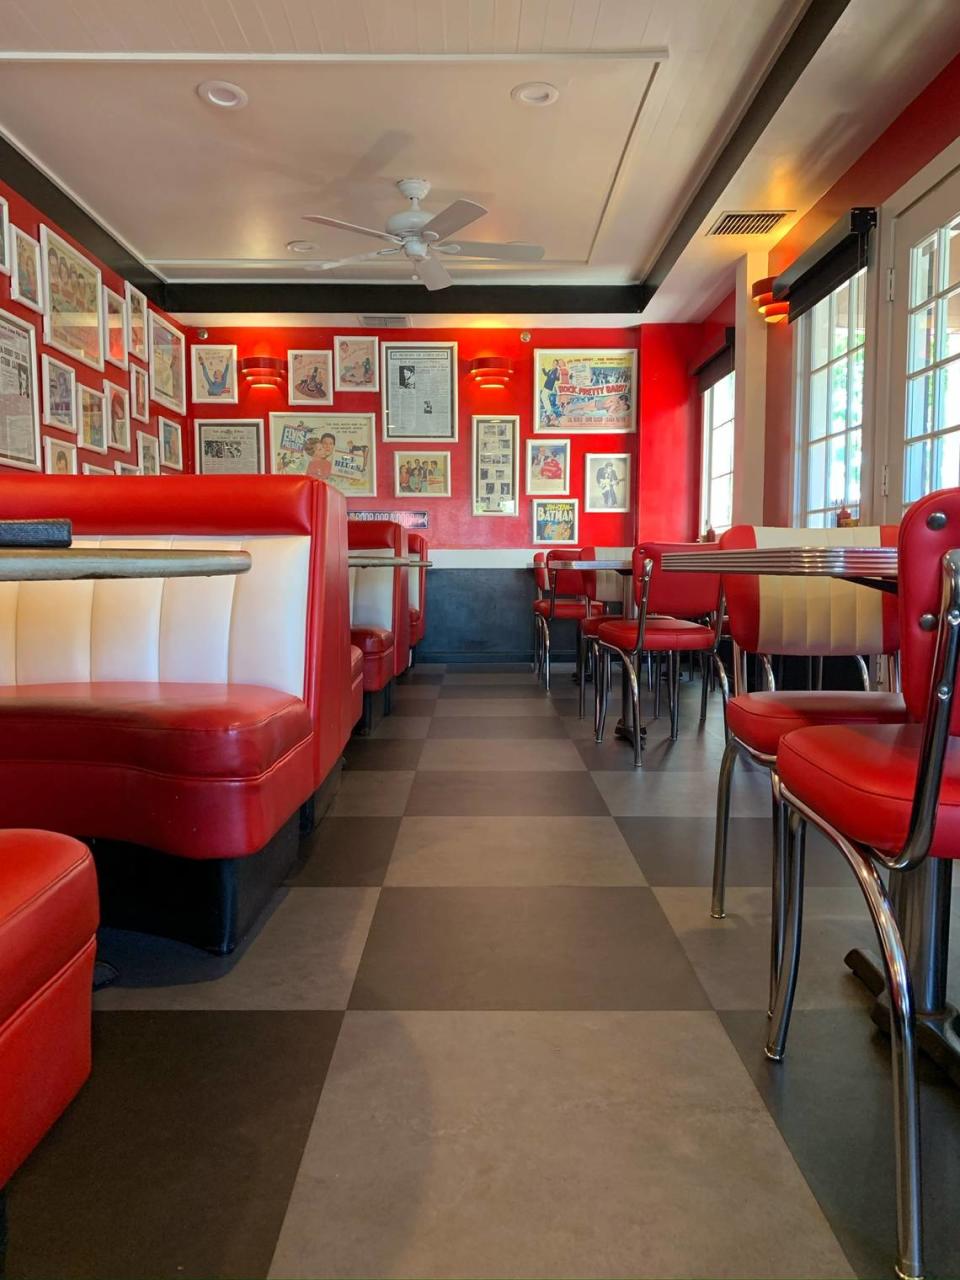 Cool Cat Cafe is a ’50s-style diner started by Sean Corpuel and his father with locations in Pismo Beach and San Luis Obispo. Today, Sean’s son Zack Corpuel helps run and manage the restaurants.